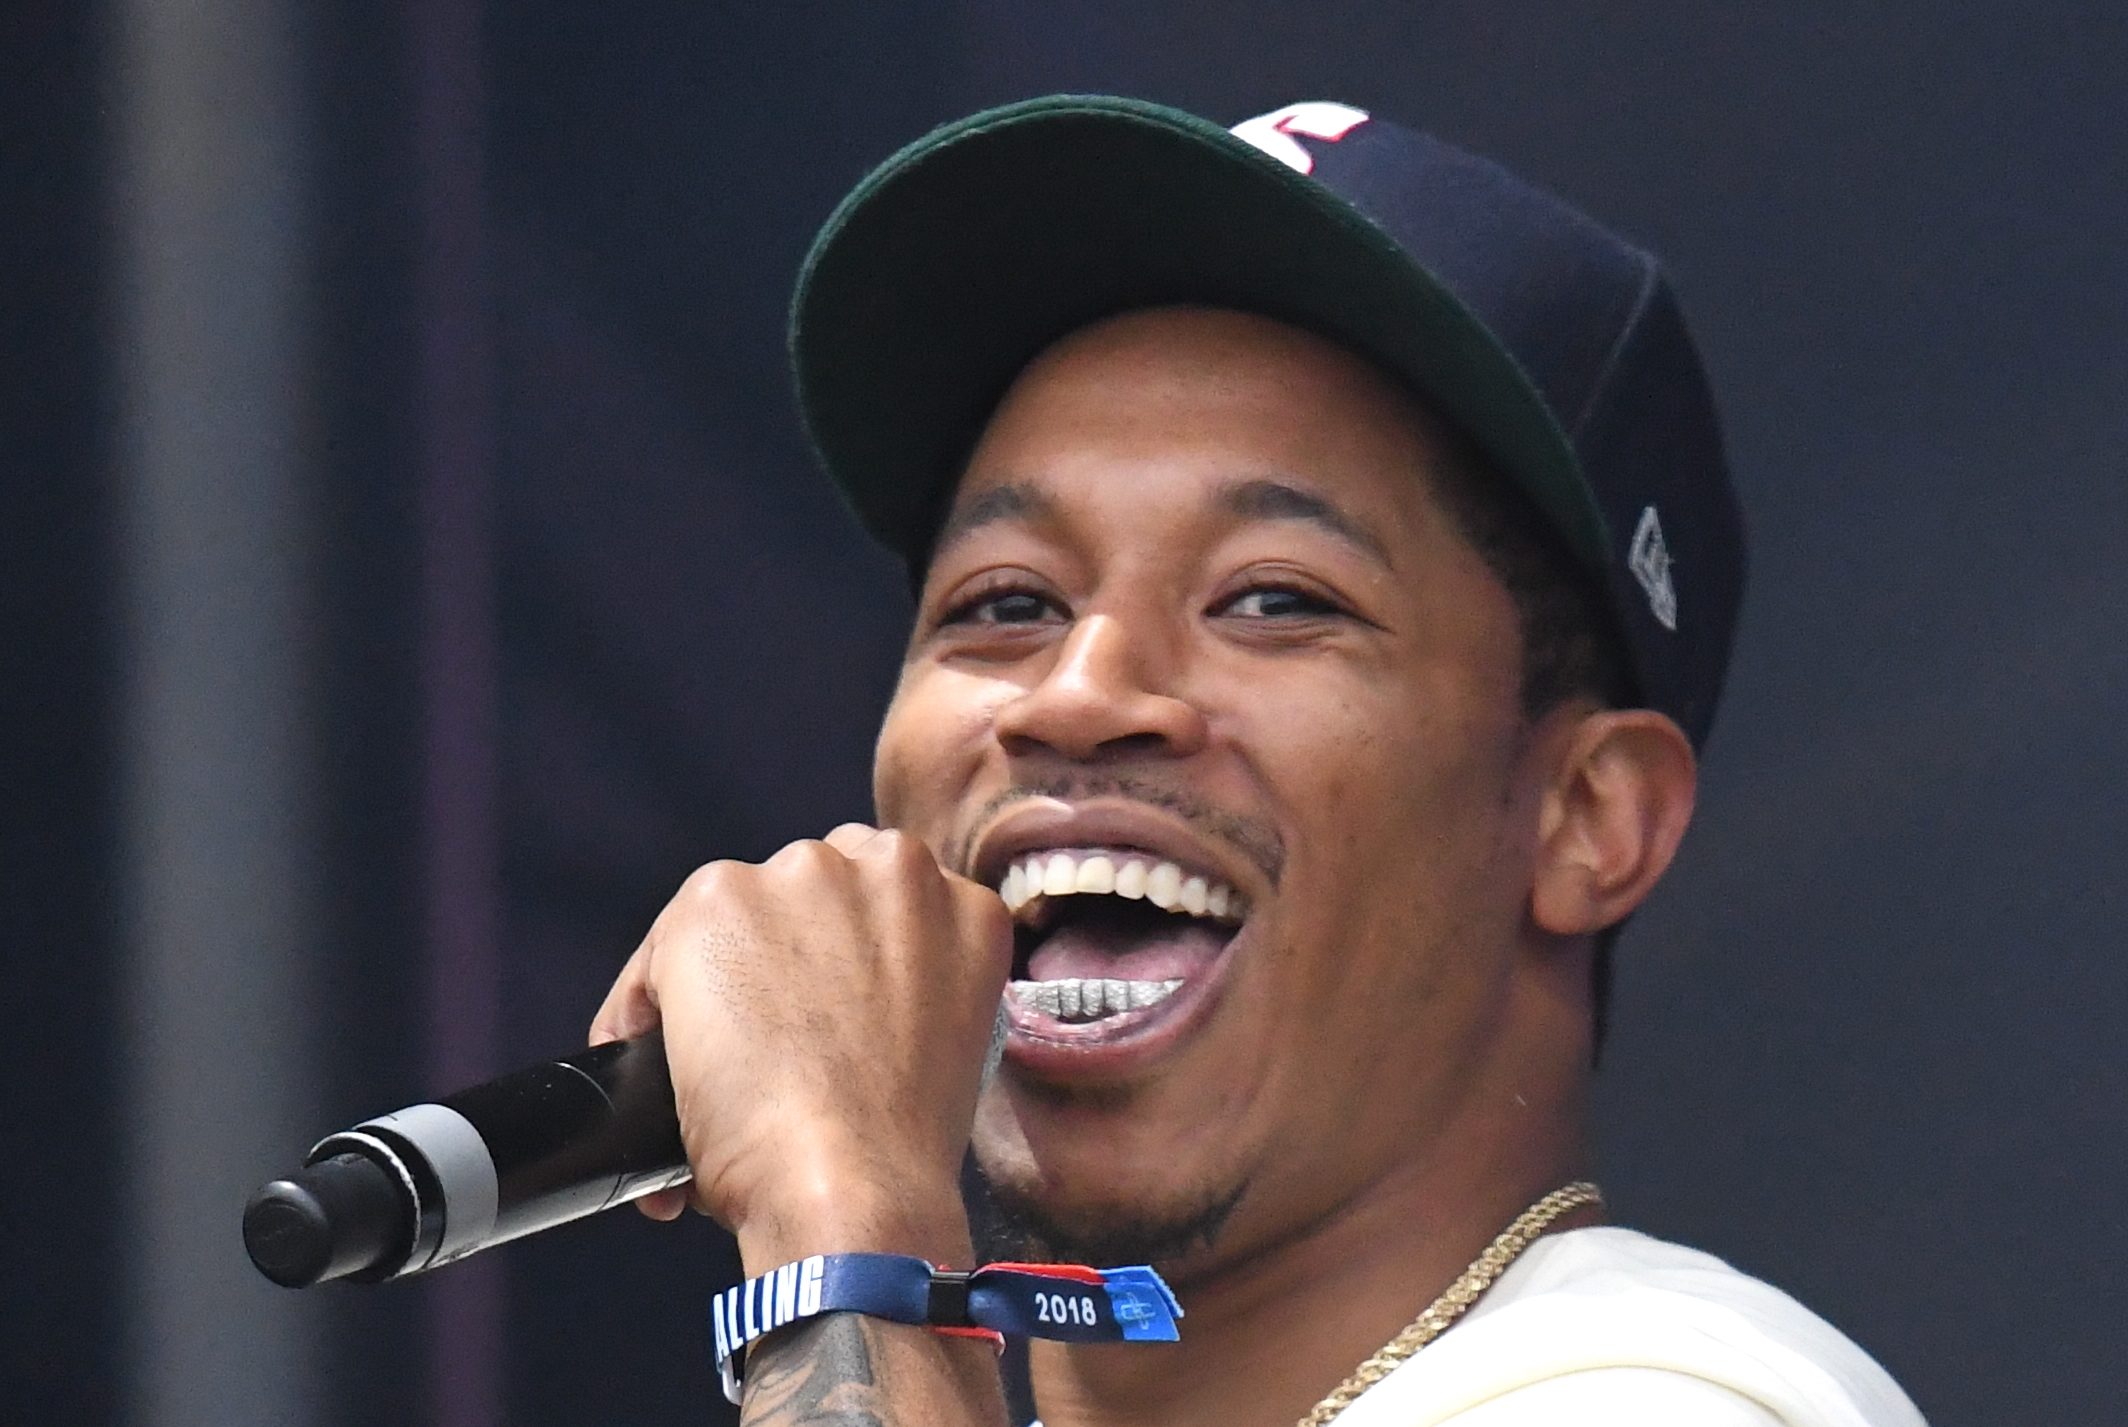 Judge Orders Sony To Pay $160 Million For 2017 Cousin Stizz Concert Shooting